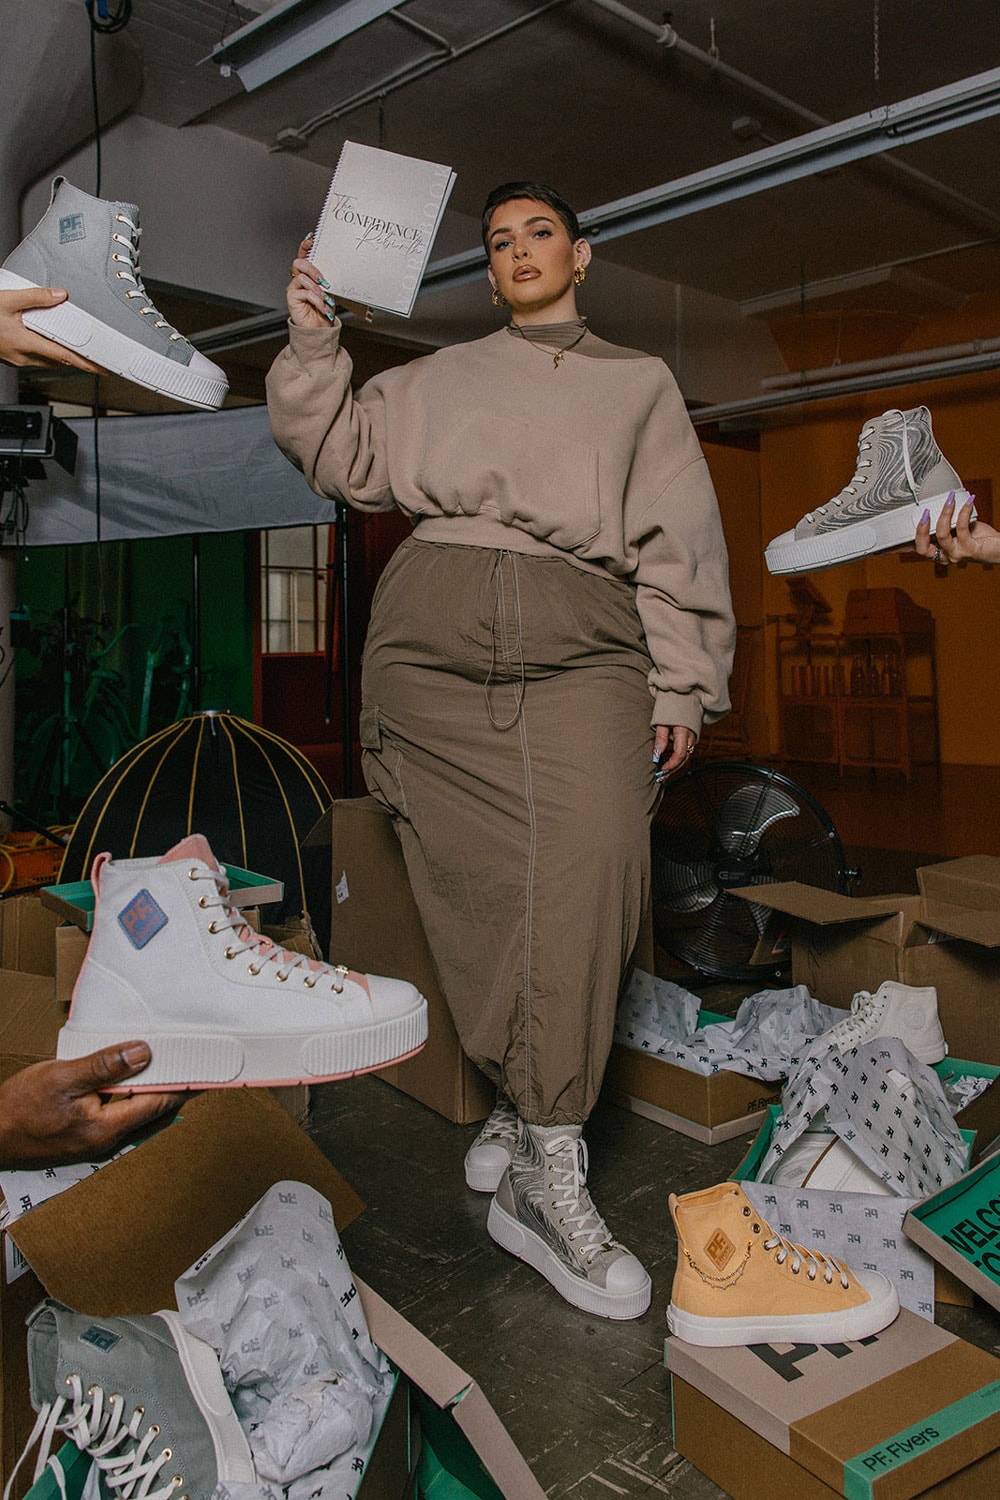 pf flyers allston sneaker release new show cement mirage white-peaches and cream colorway spring summer 2023 footwear drop all american hi sneaker high top female-led female focused